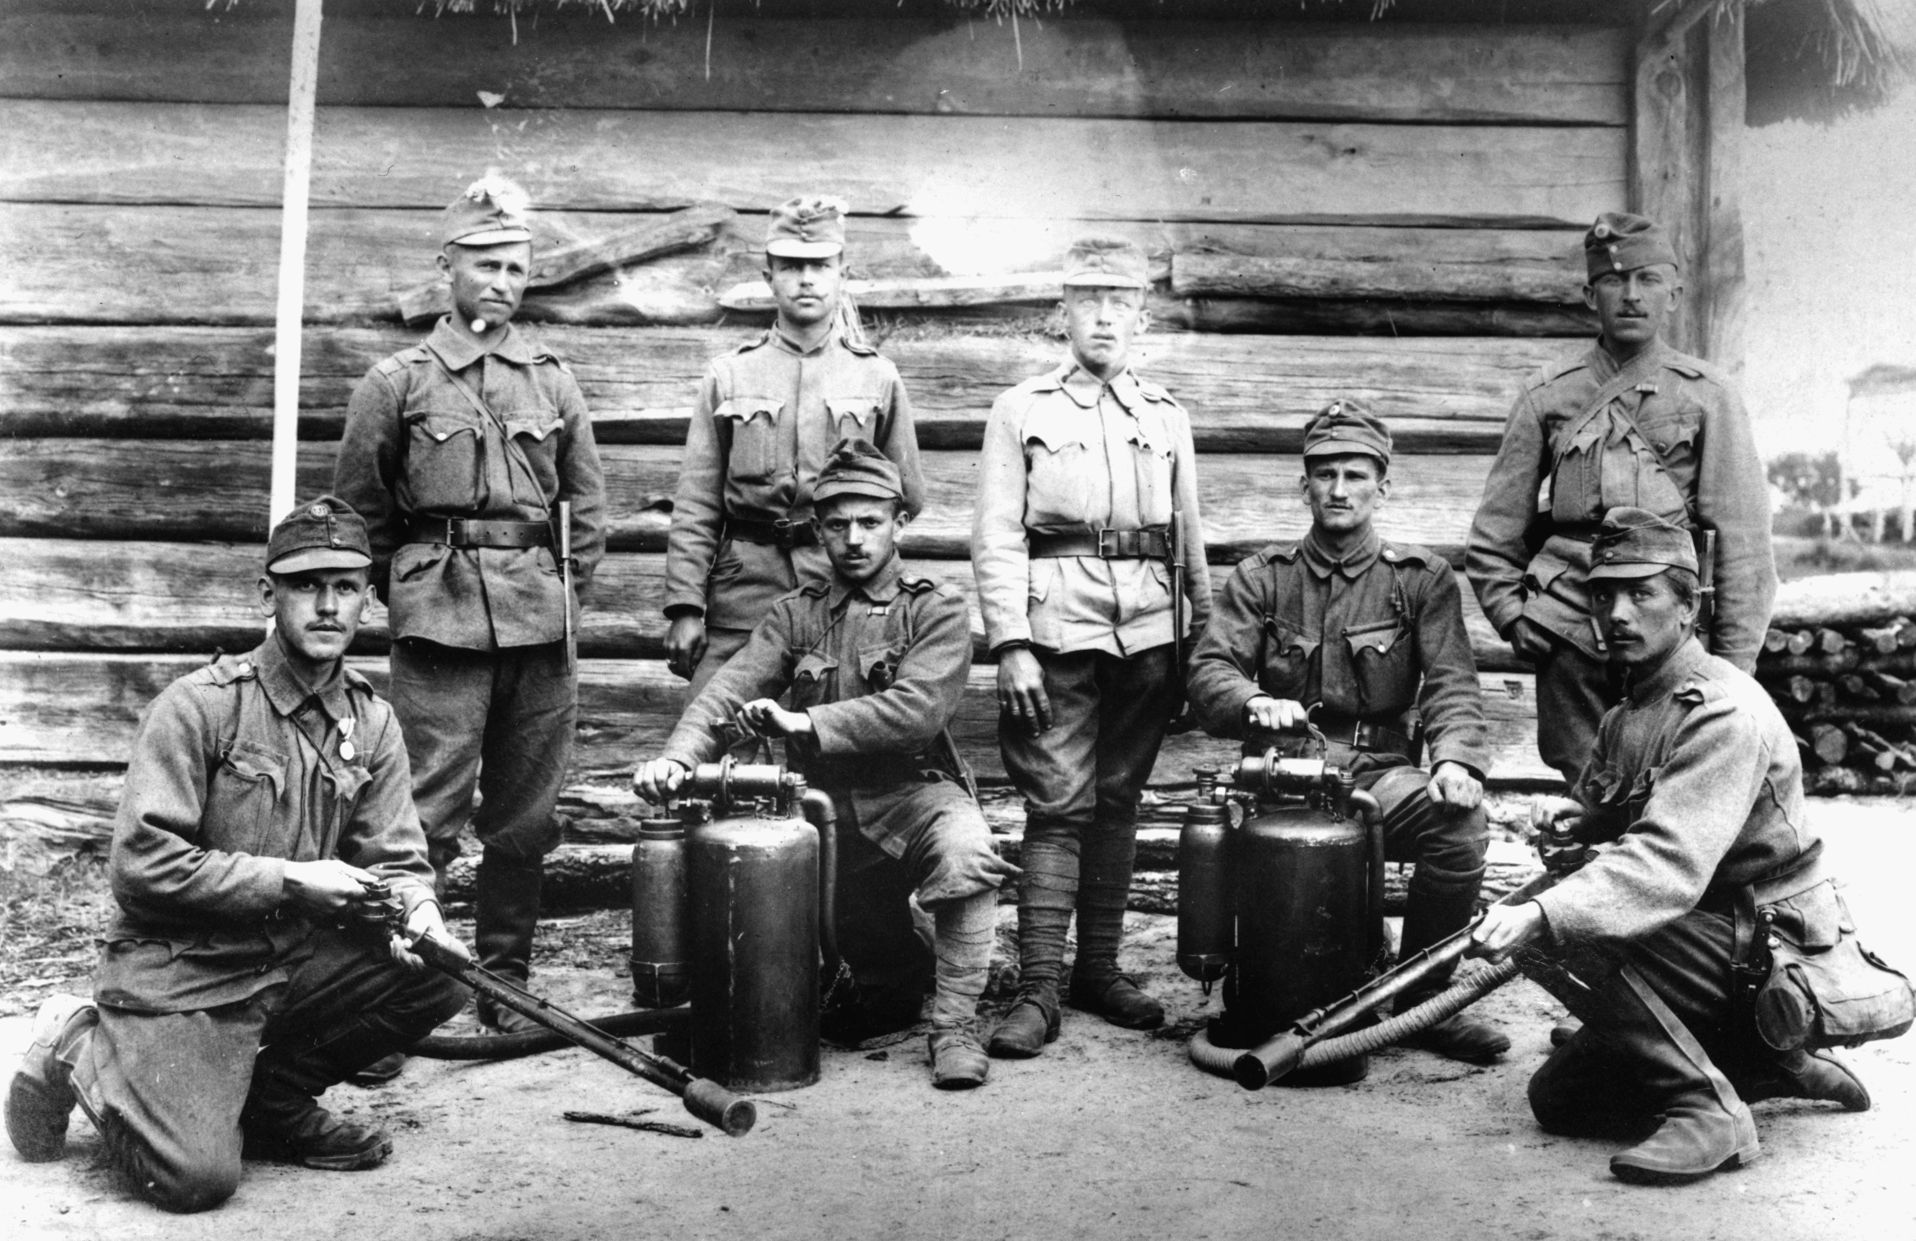 A German flamethrower crew with fuel tanks and equipment.